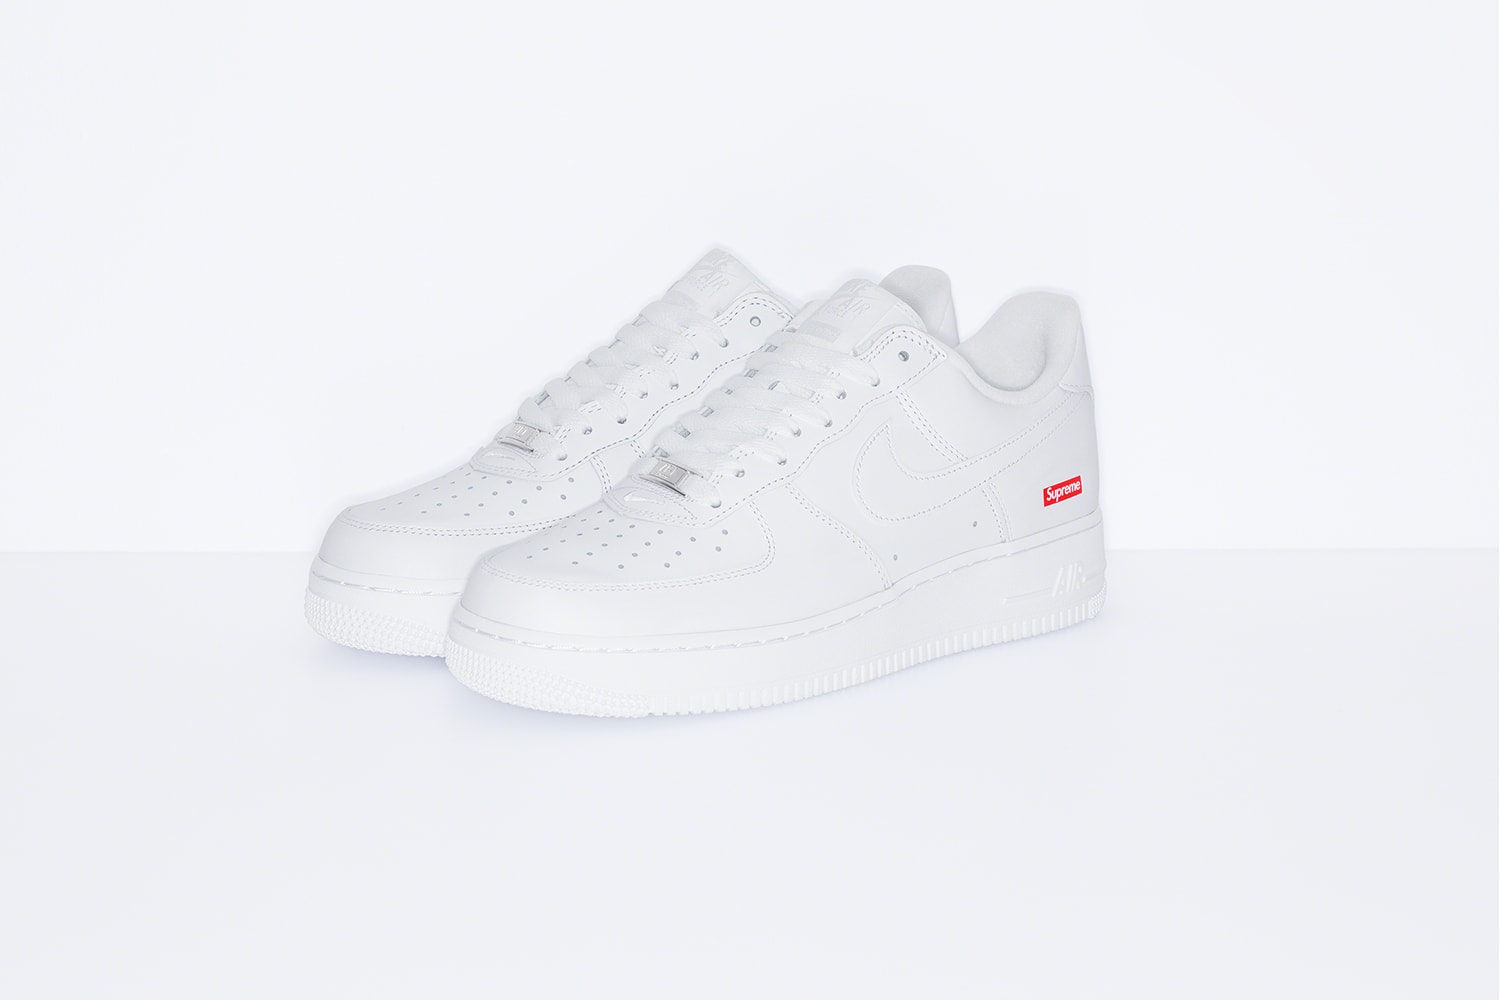 Supreme x Nike Air Force 1 Low Release Info Uptowns Shoes Sneakers footwear Kicks collaborations Box Logo Bogo 